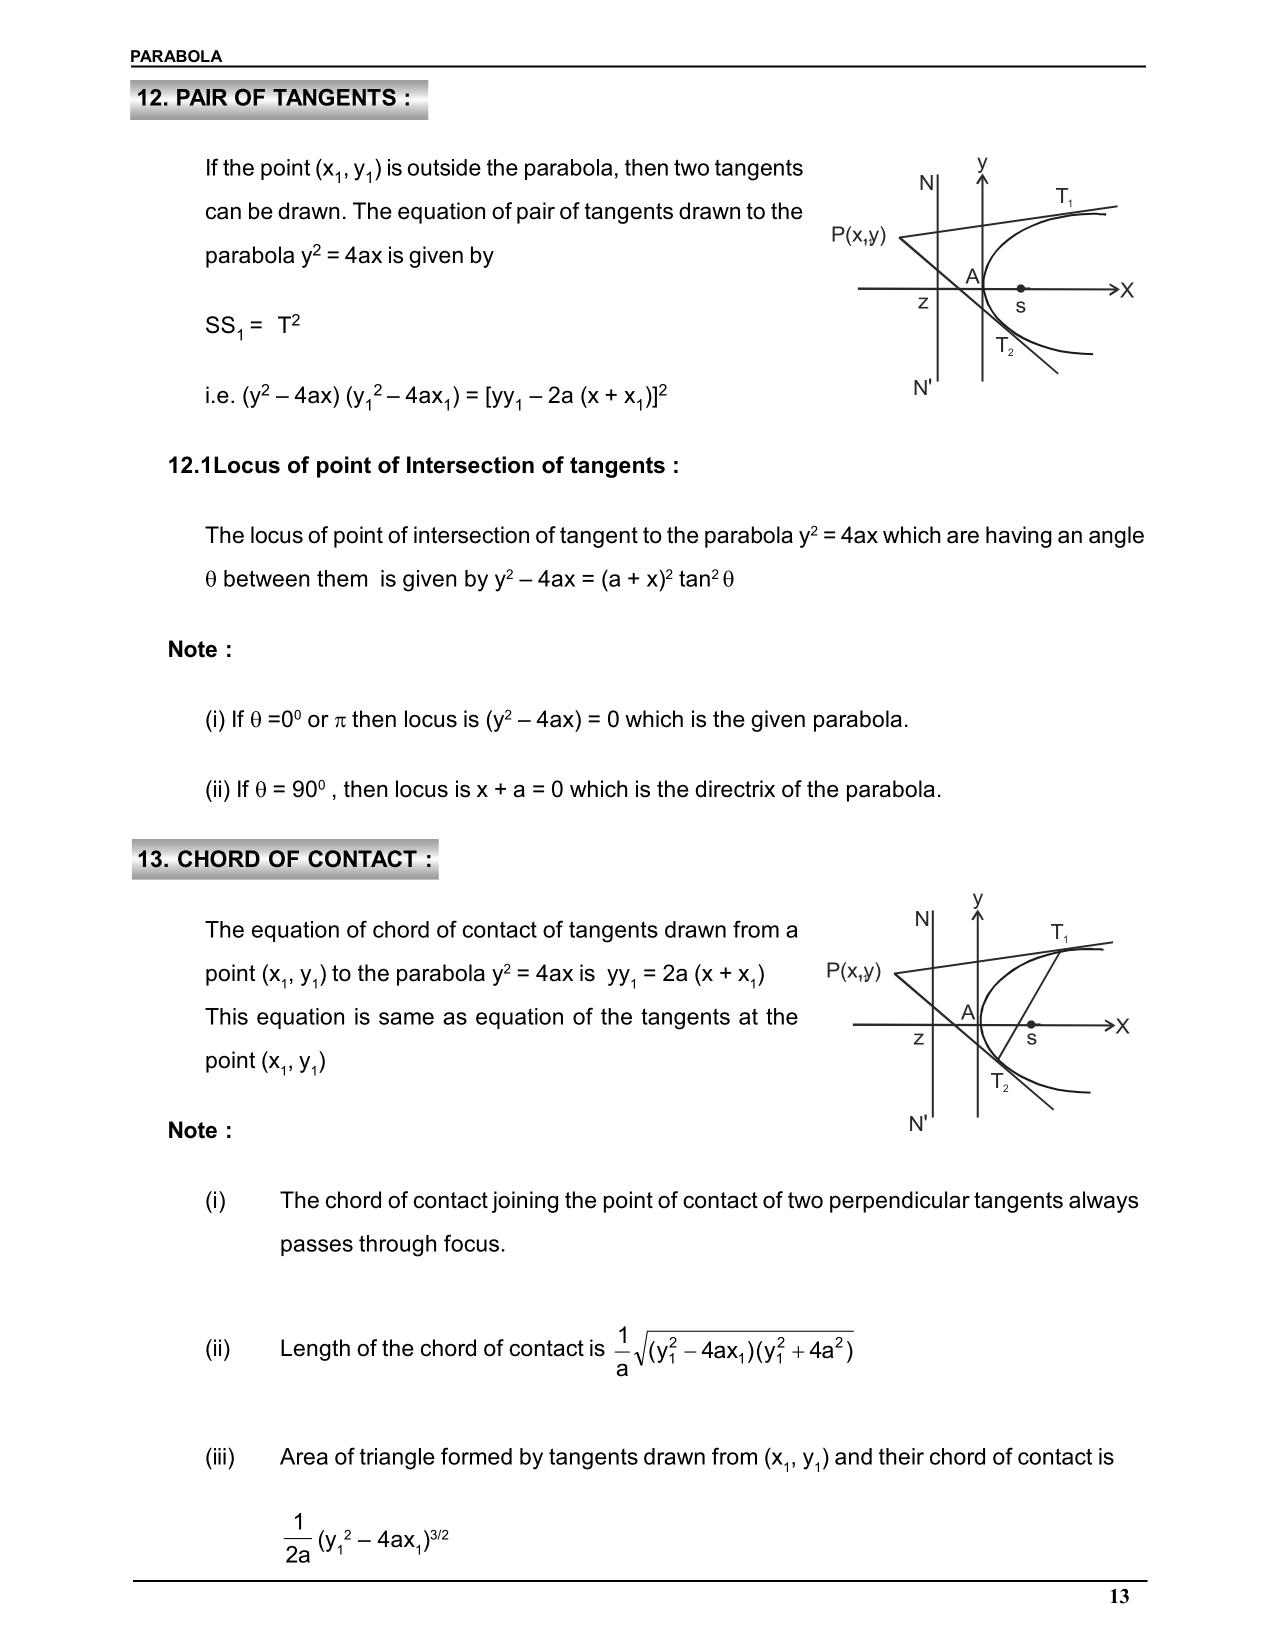 Parabola Class 11 Notes & Numericals: Pair of Tangents